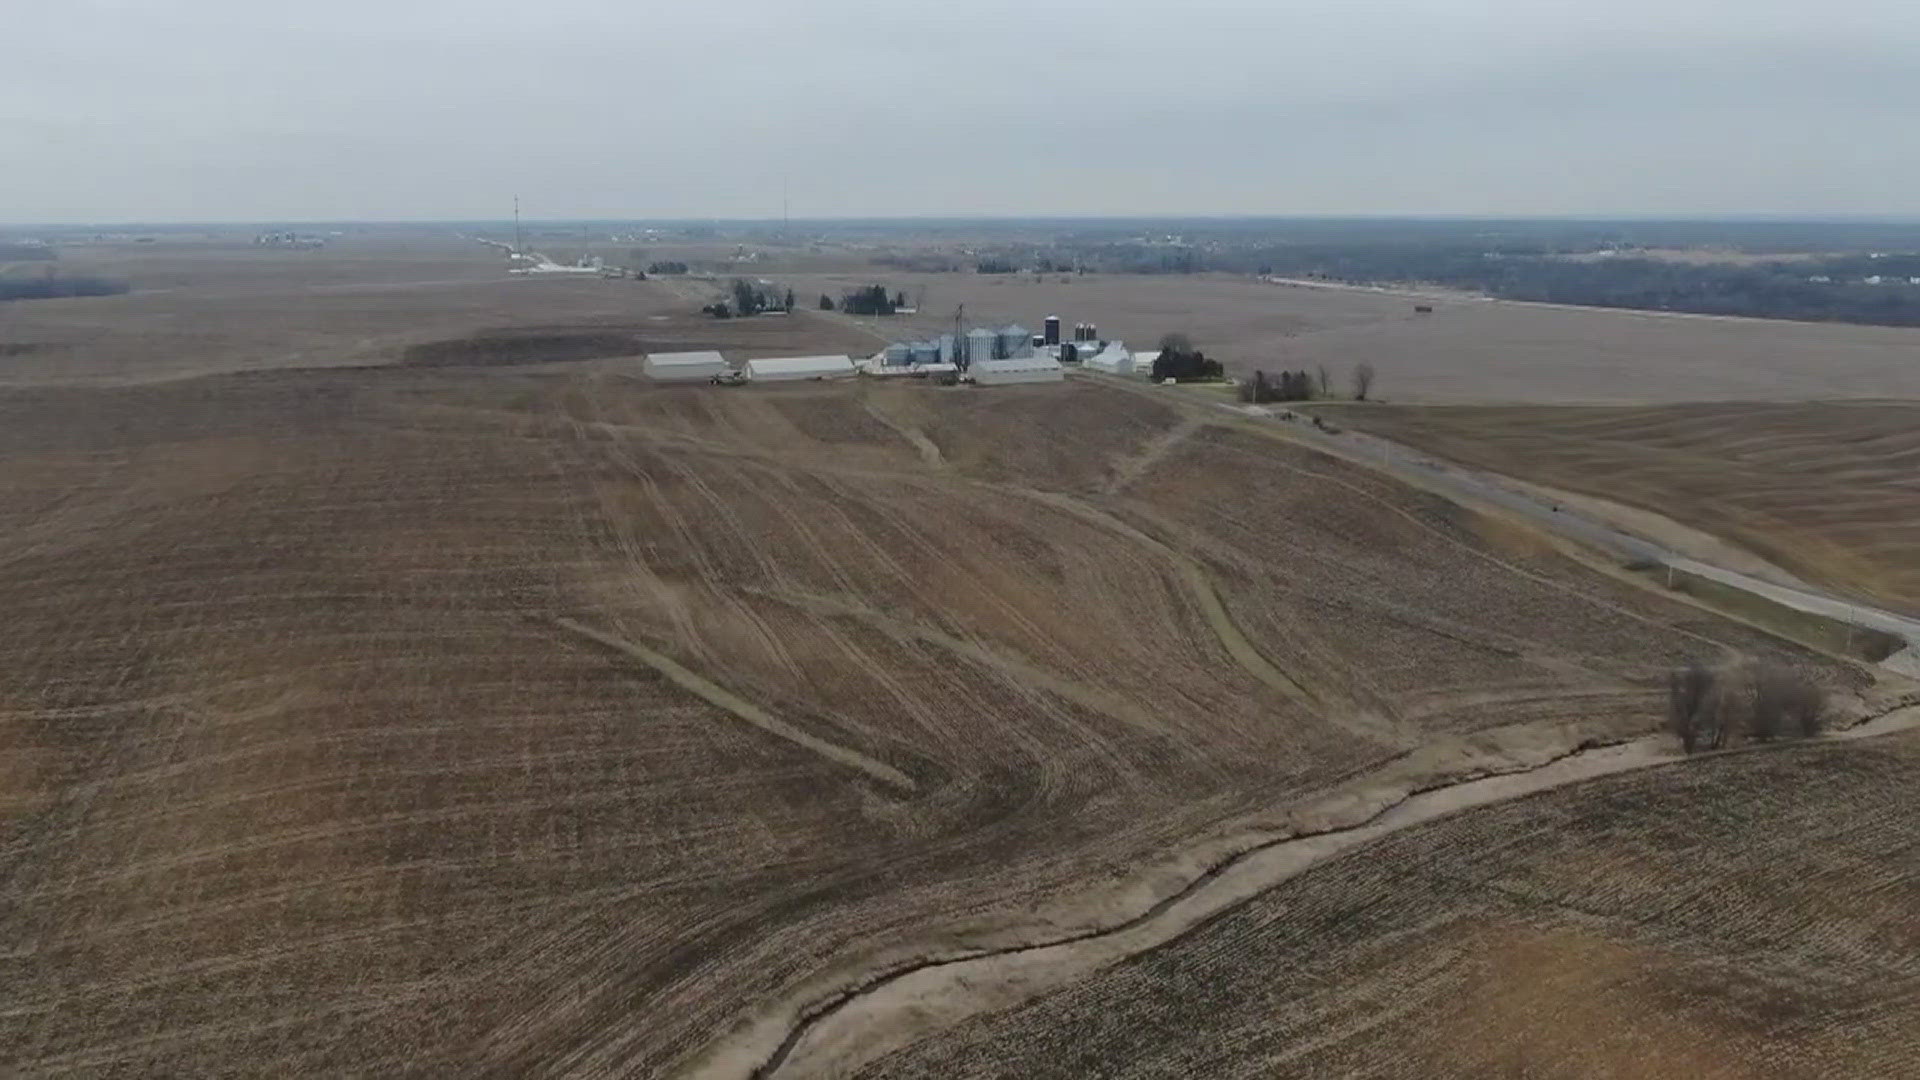 Steady rainfall during the month of April has improved drought conditions across Iowa, according to the latest update from the Department of Natural Resources.